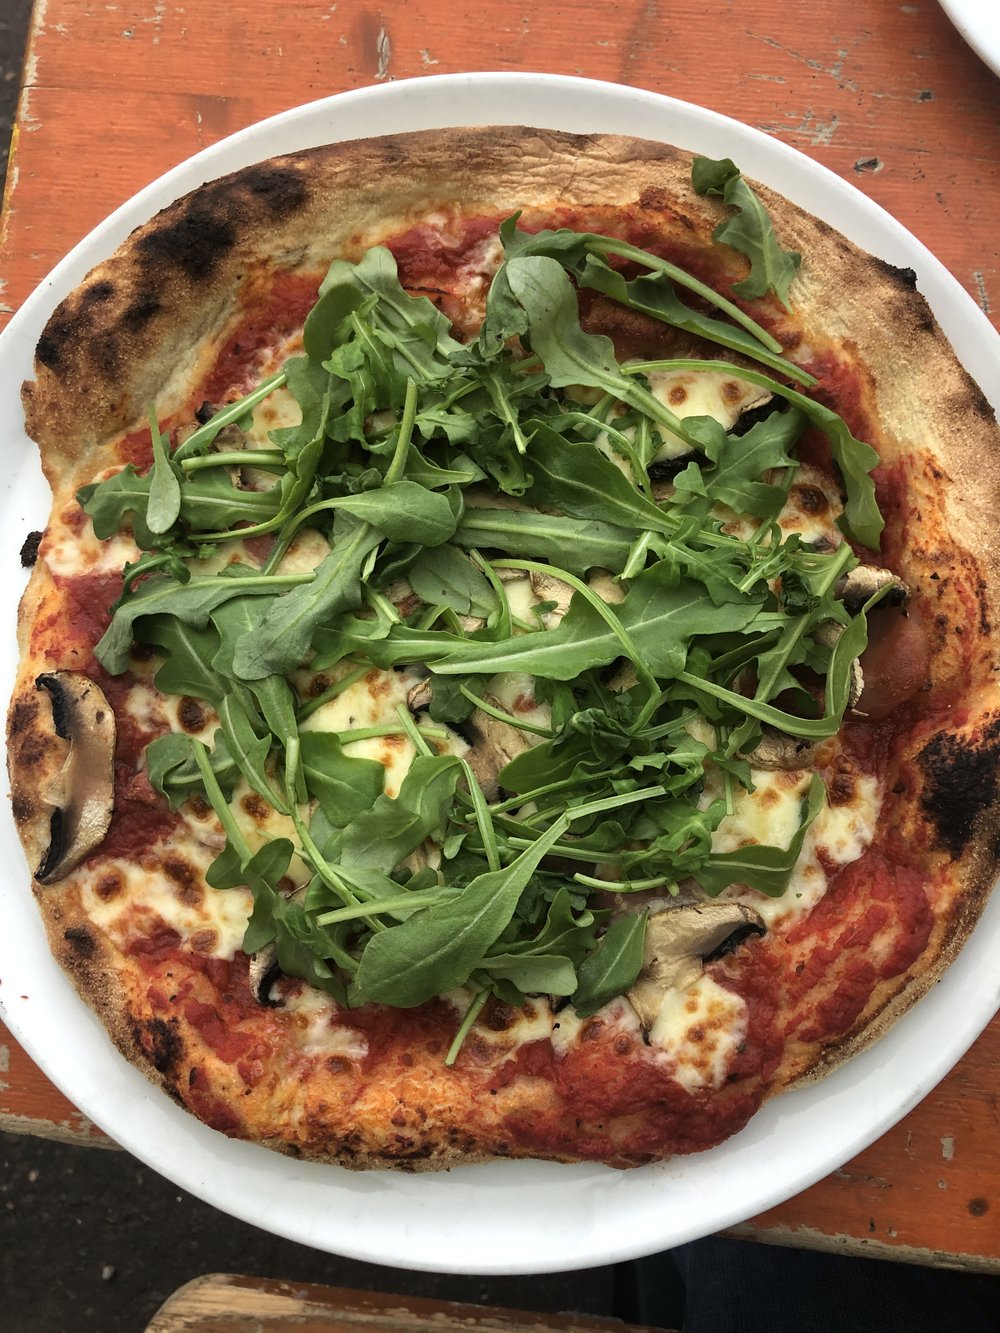 A Well-Topped Pie with rocket, Serrano ham &amp; field mushrooms @$11.00